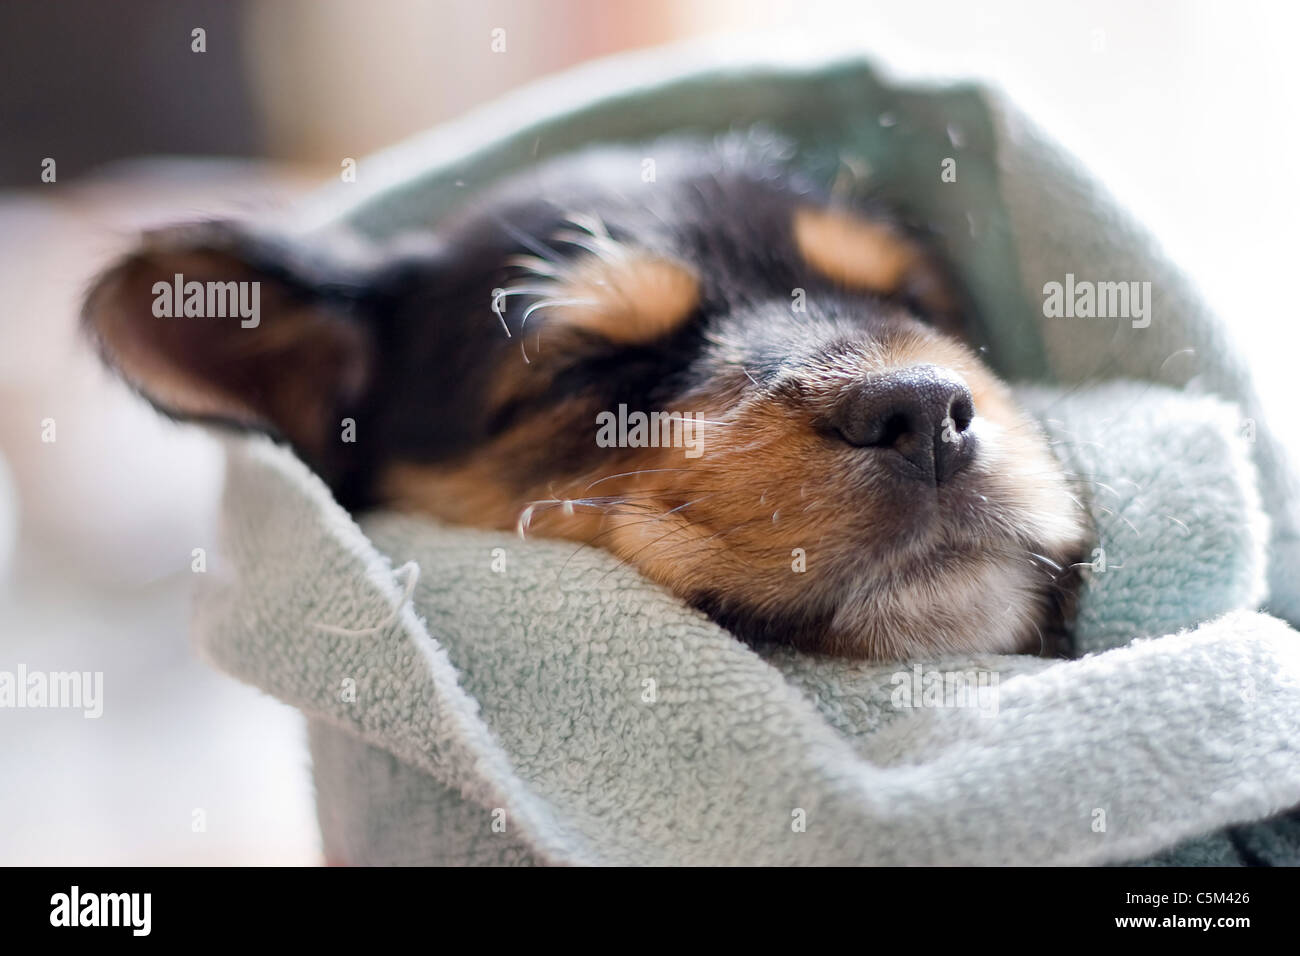 A an adorable puppy all wrapped up in a blanket. Stock Photo